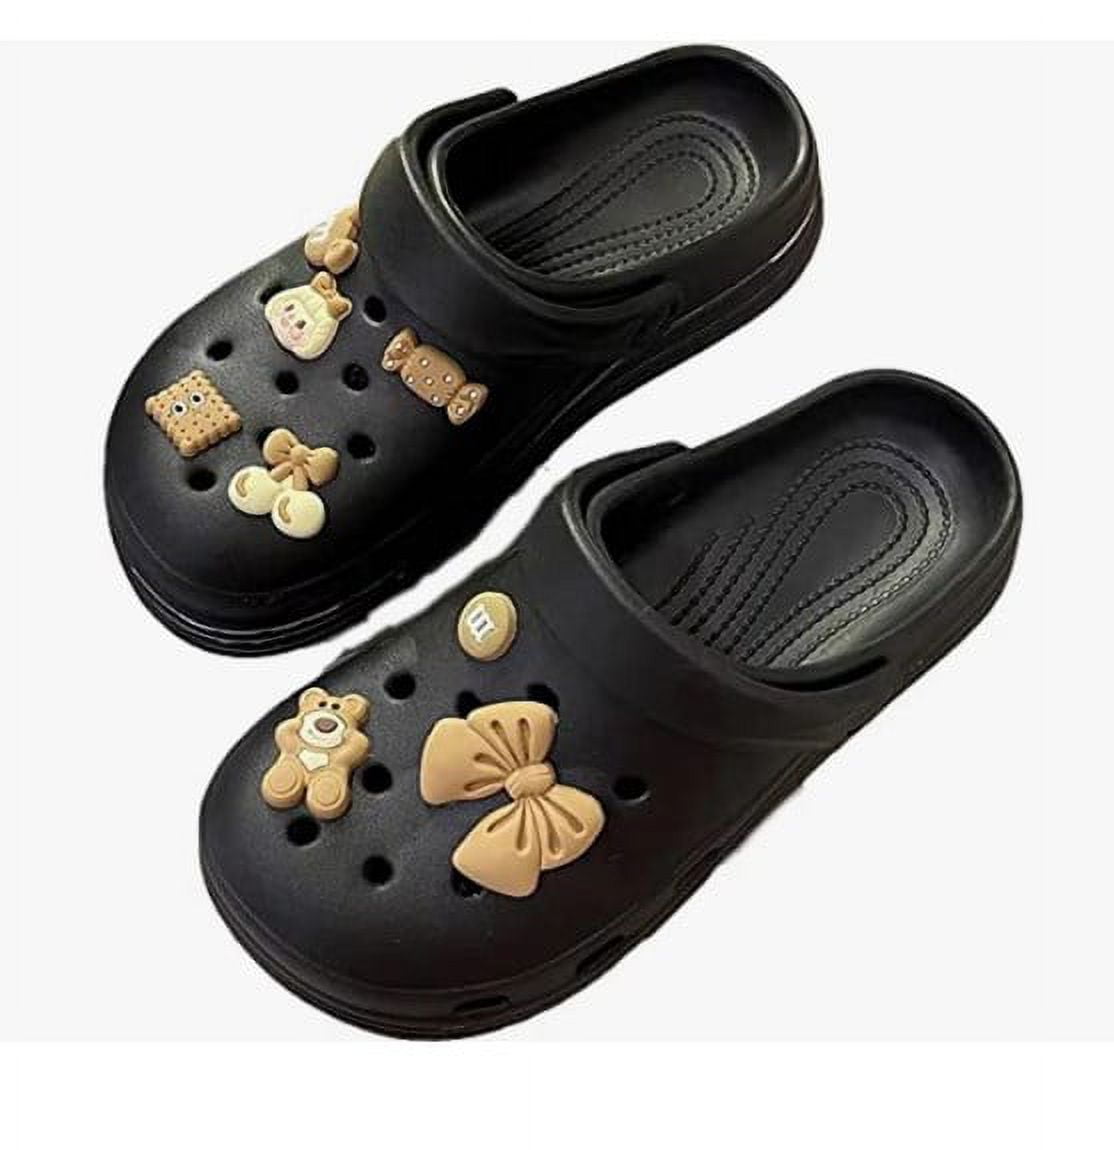 Men's and Women's Clogs Garden Shoes Outdoor Beach Slippers with